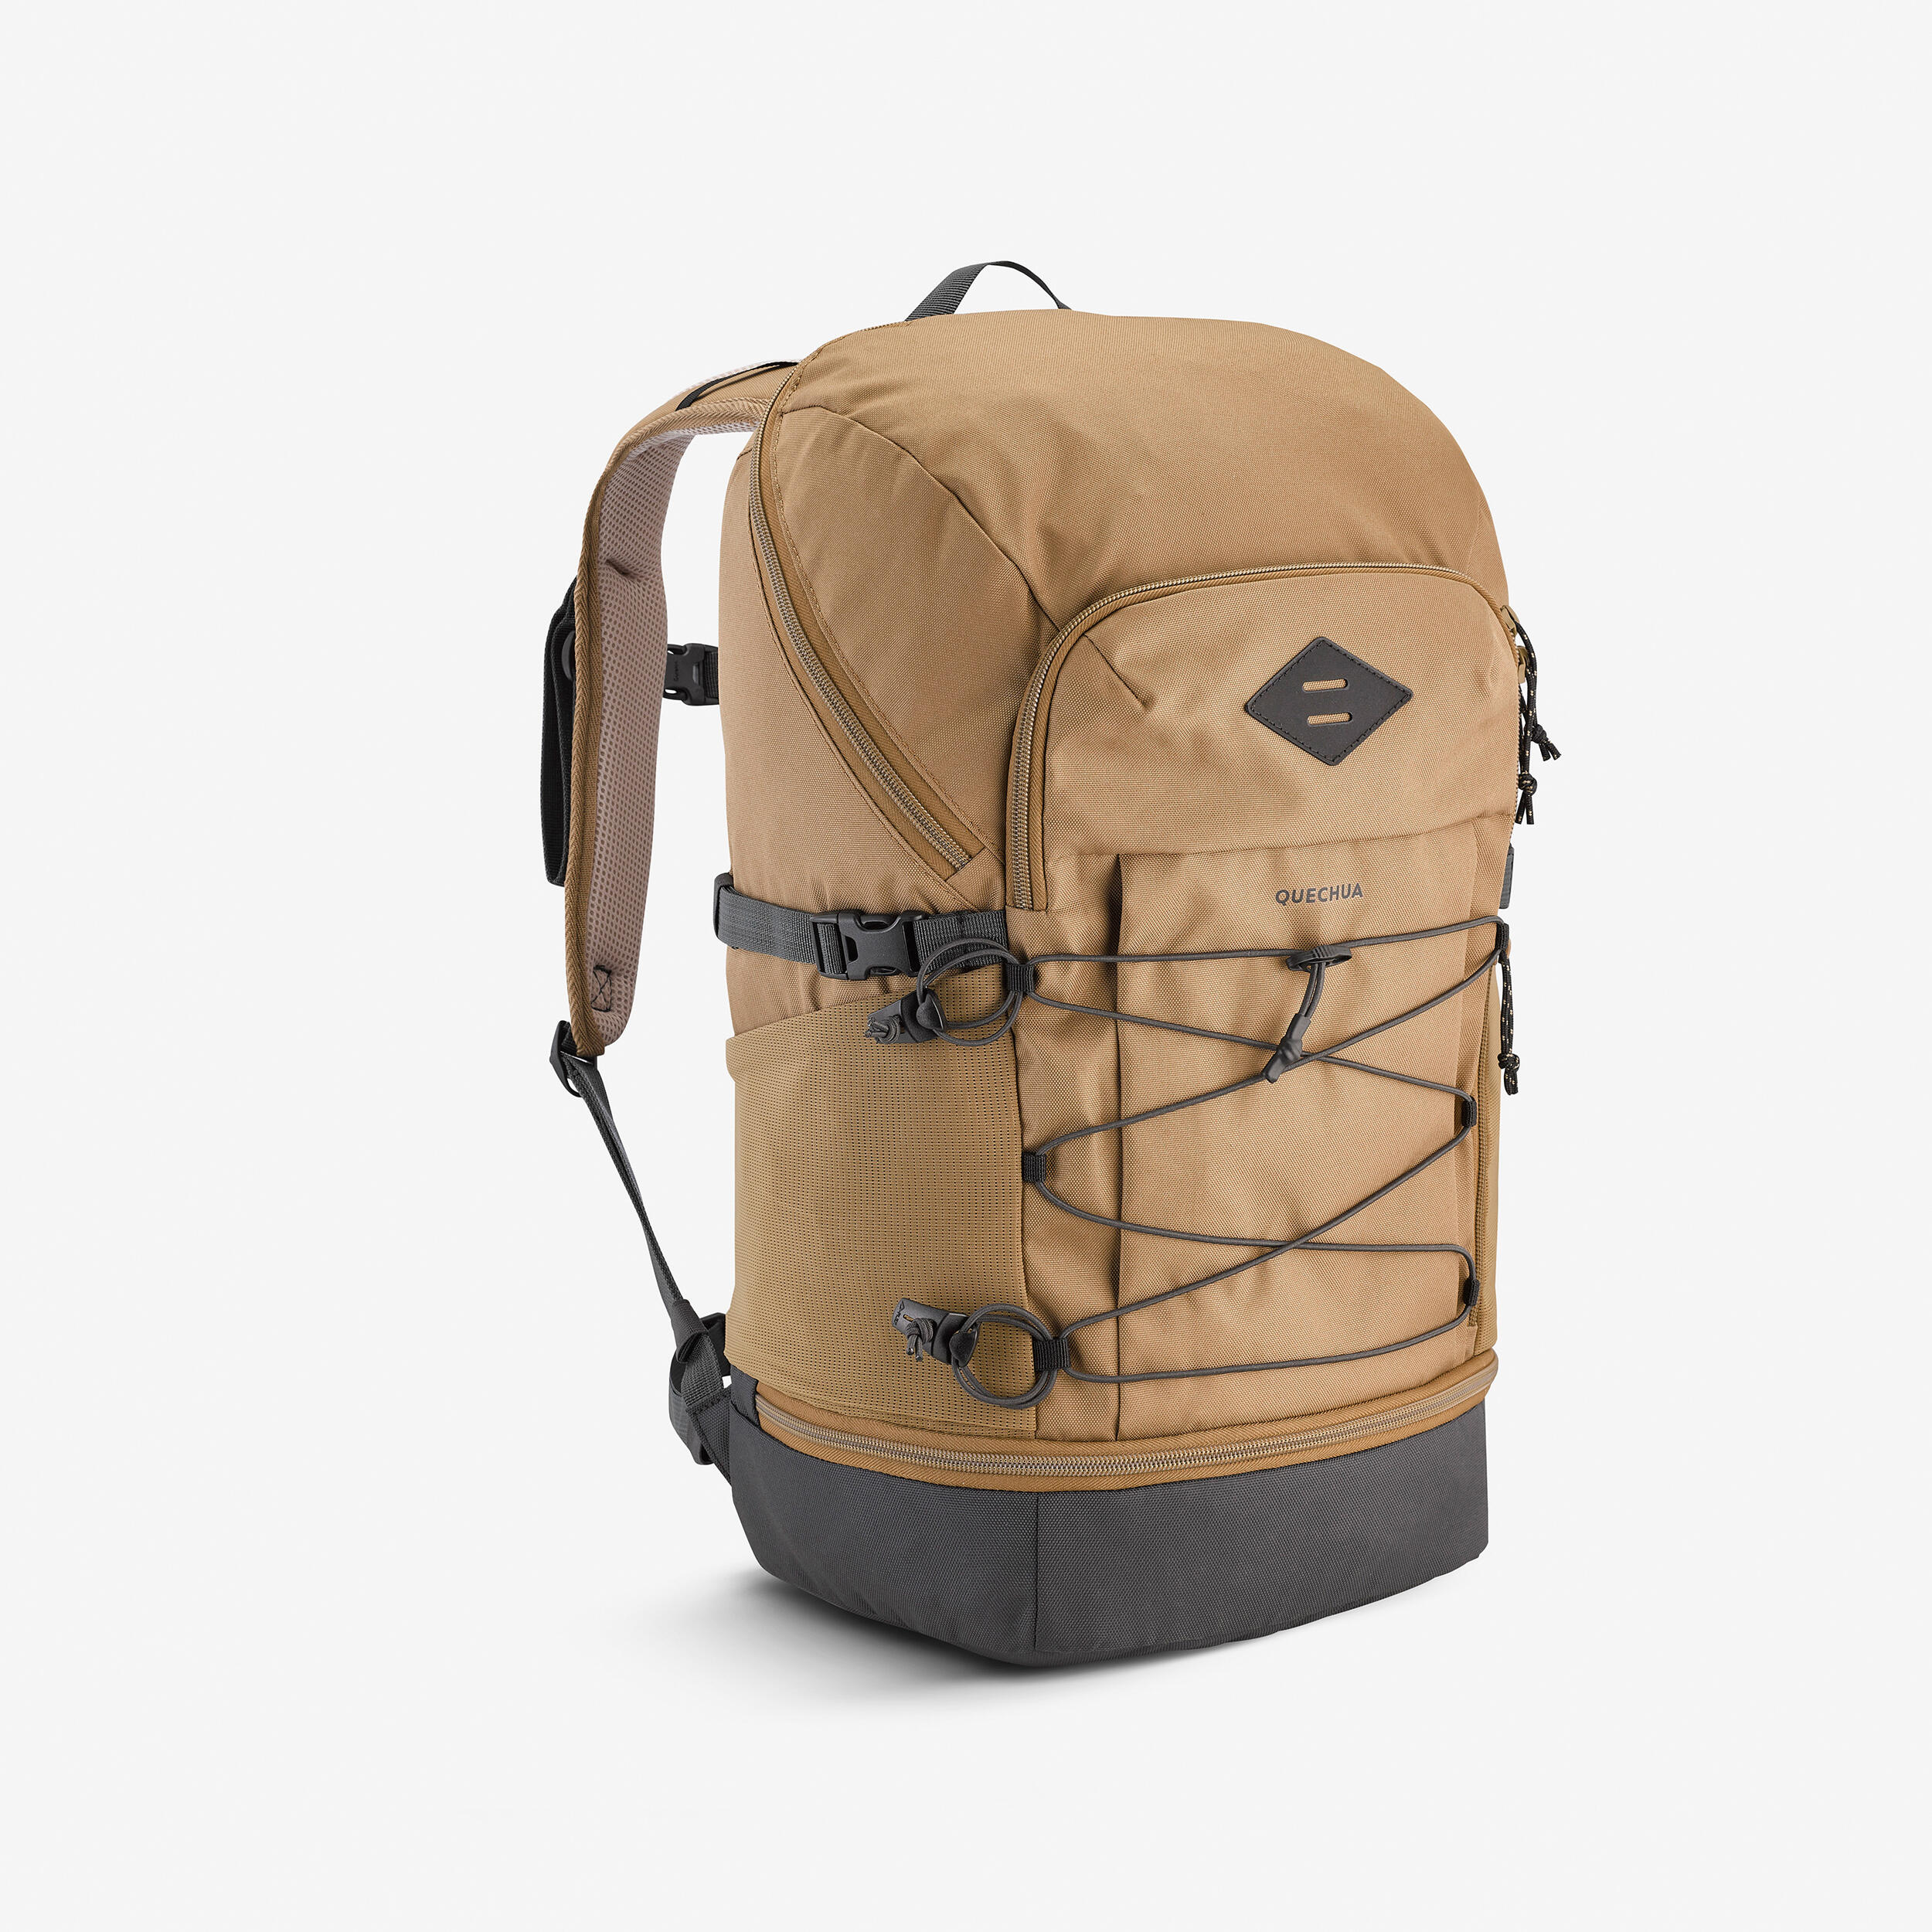 Quechua Hiking Backpack 30l - Nh Arpenaz 500